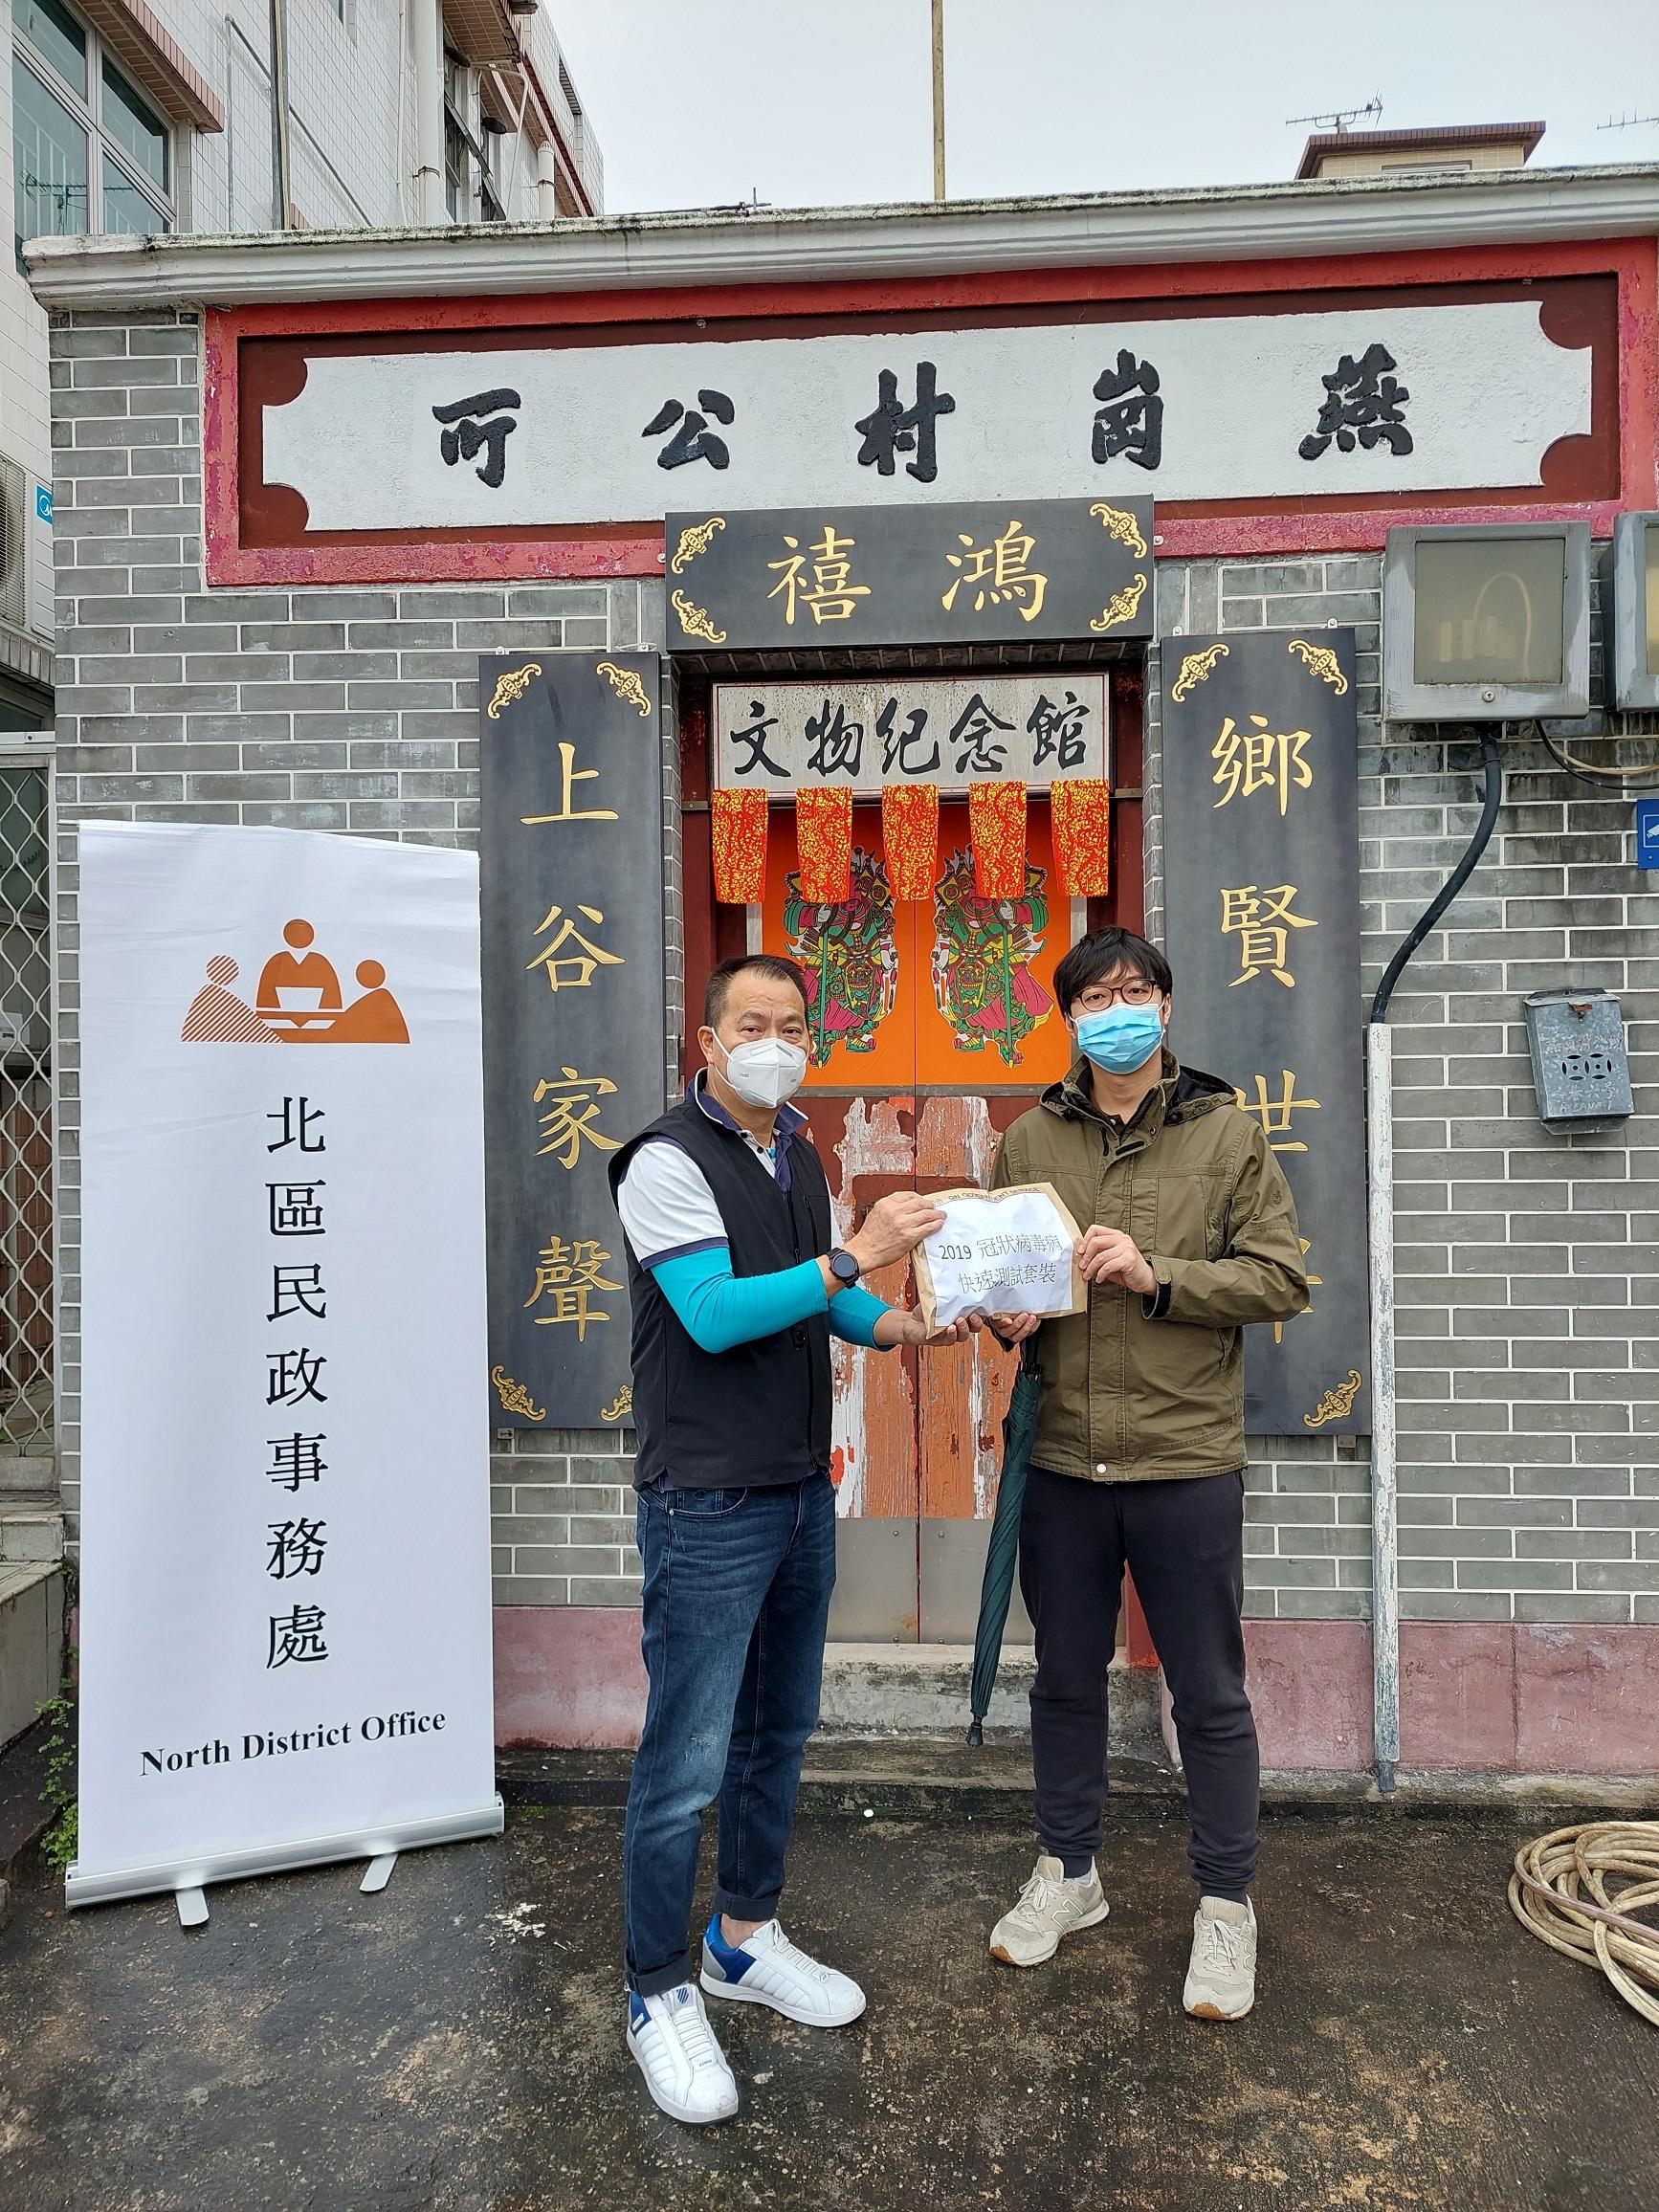 The North District Office today (February 13) distributed rapid test kits to cleansing workers working in the affected area in Yin Kong (including Bik Wah Garden, Nam Yuen and the village type houses in the area around Yin Lam Villa) for voluntary testing through the Village Representative of Yin Kong.